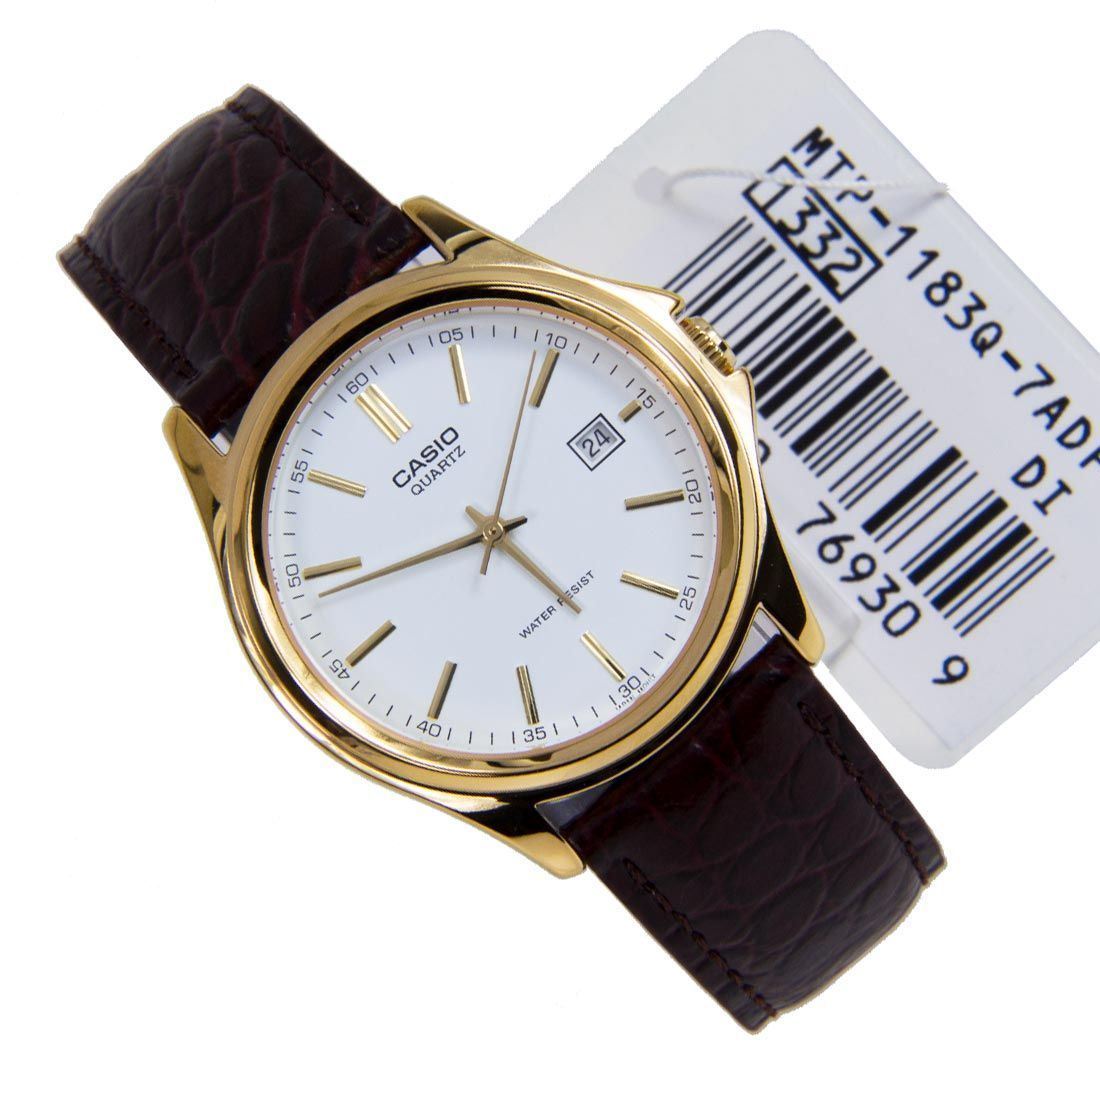 Casio Mens Quartz Watch with Leather Strap and Gold Bezel. MTP1183Q-7A